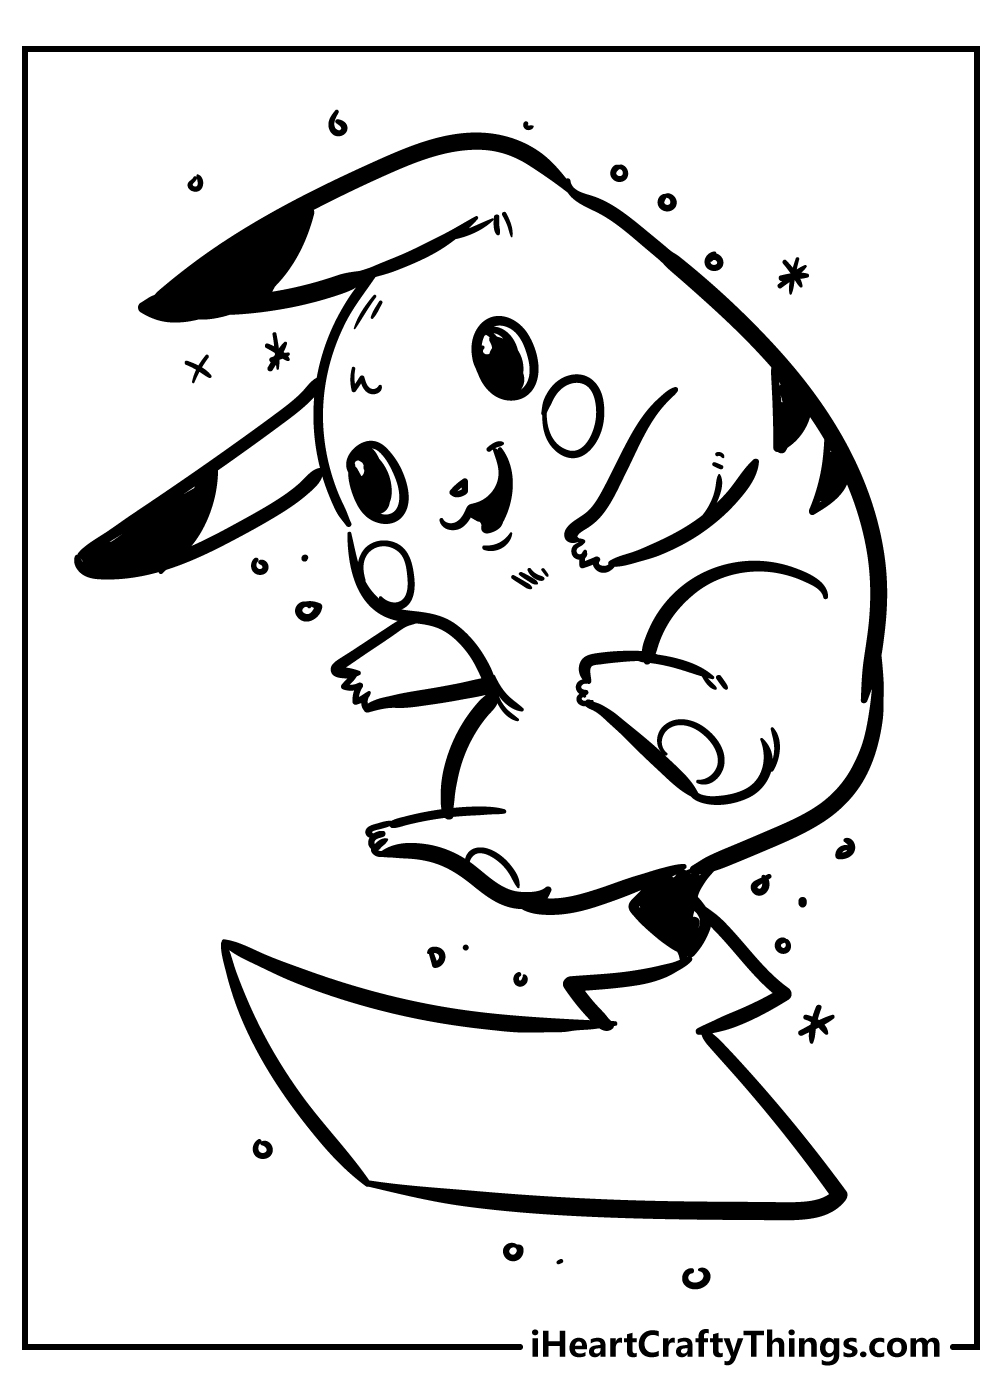 Pikachu coloring pages for preschoolers free printable